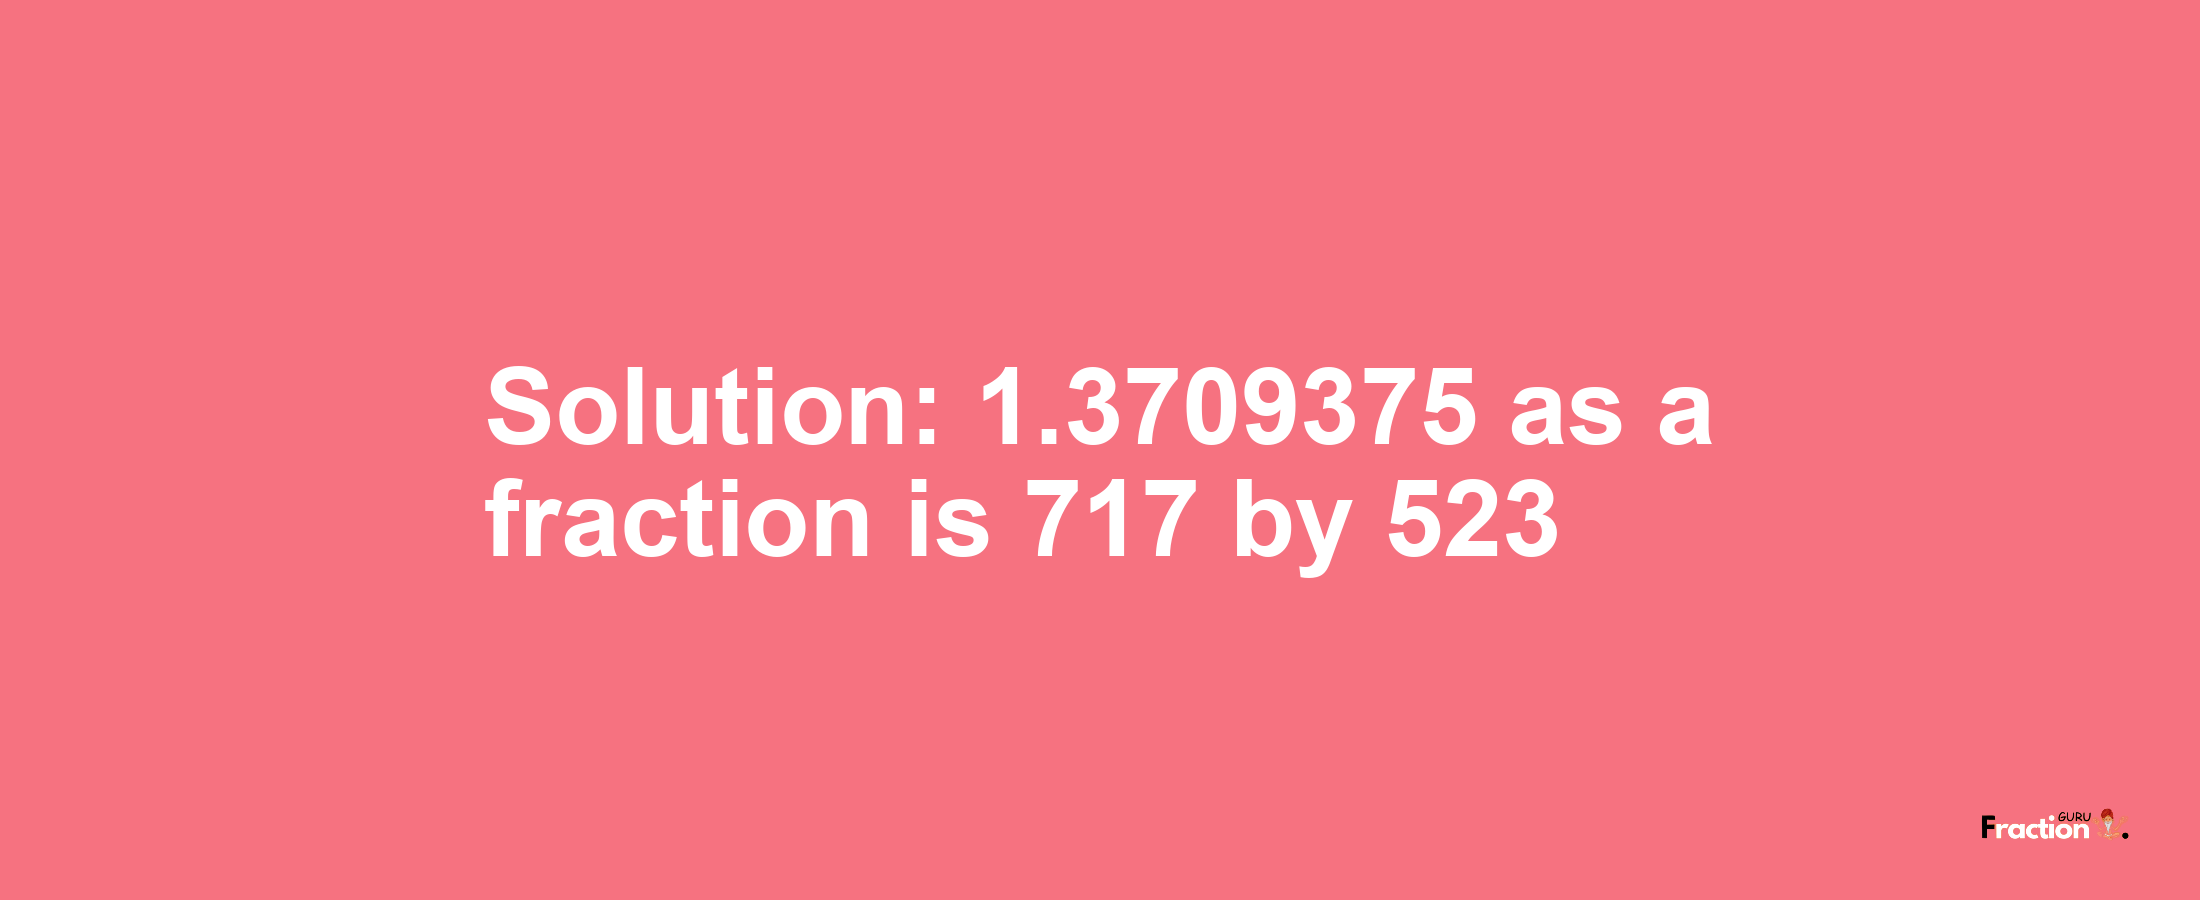 Solution:1.3709375 as a fraction is 717/523